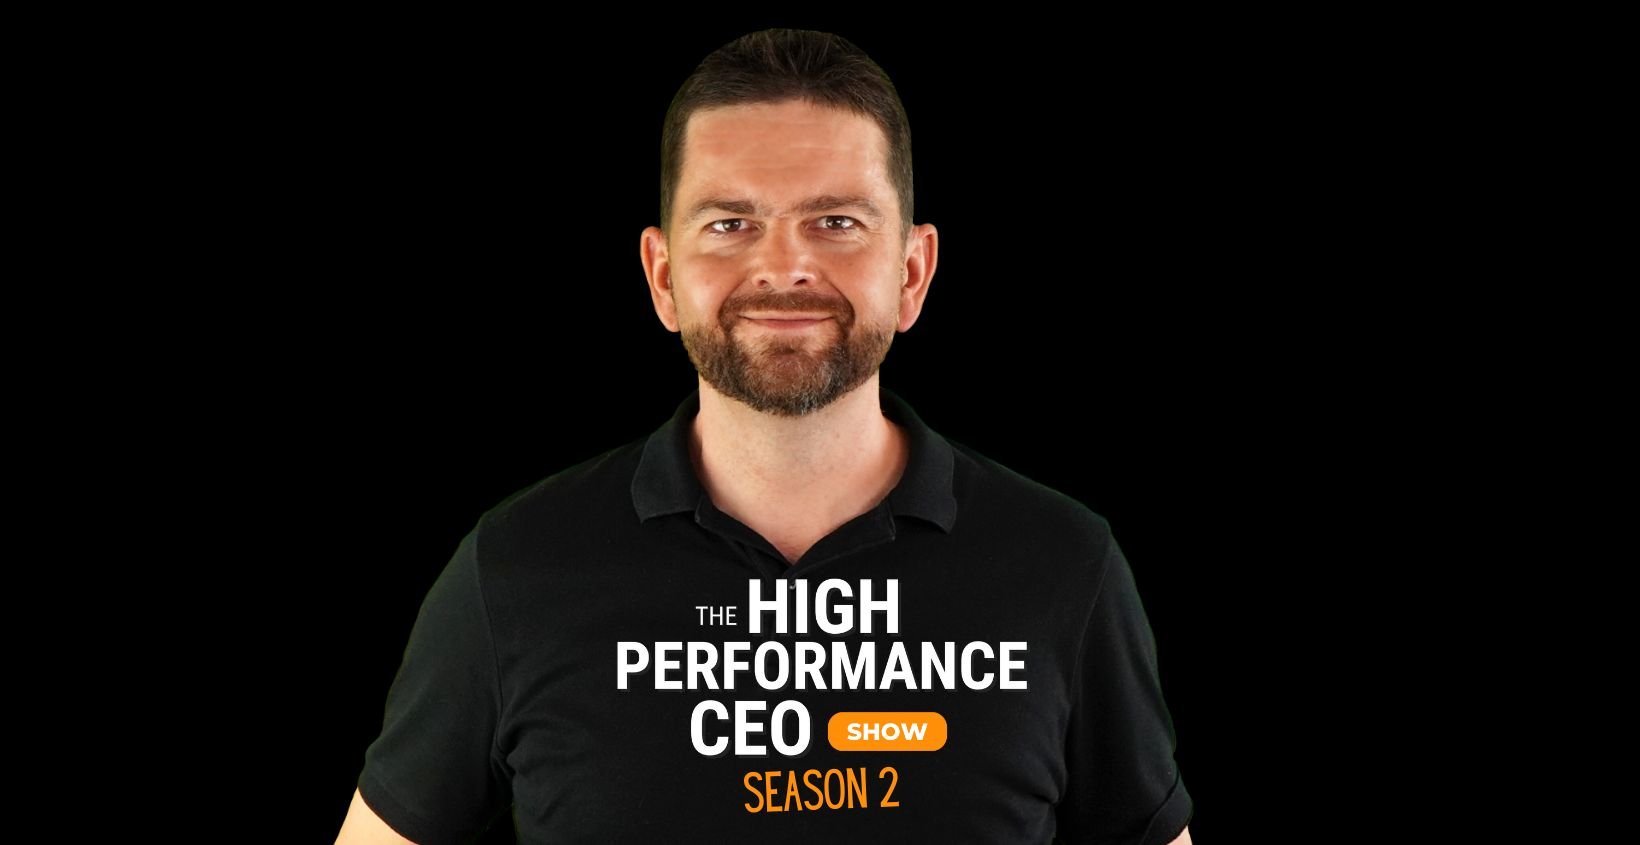 The High-Performance CEO Show